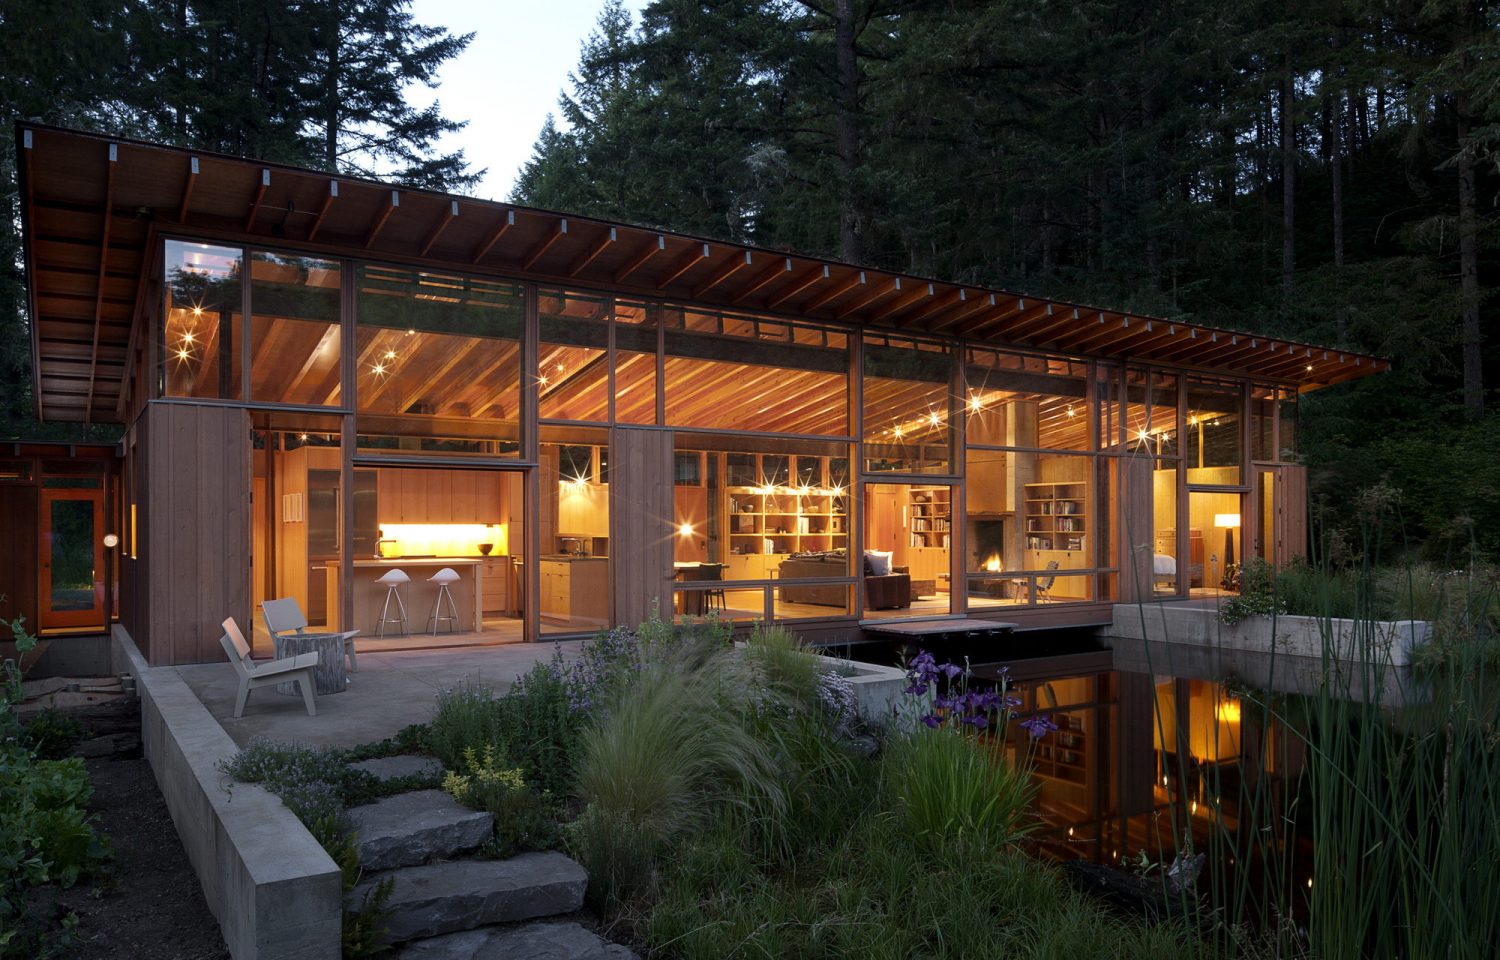 Newberg Residence by Cutler Anderson Architects